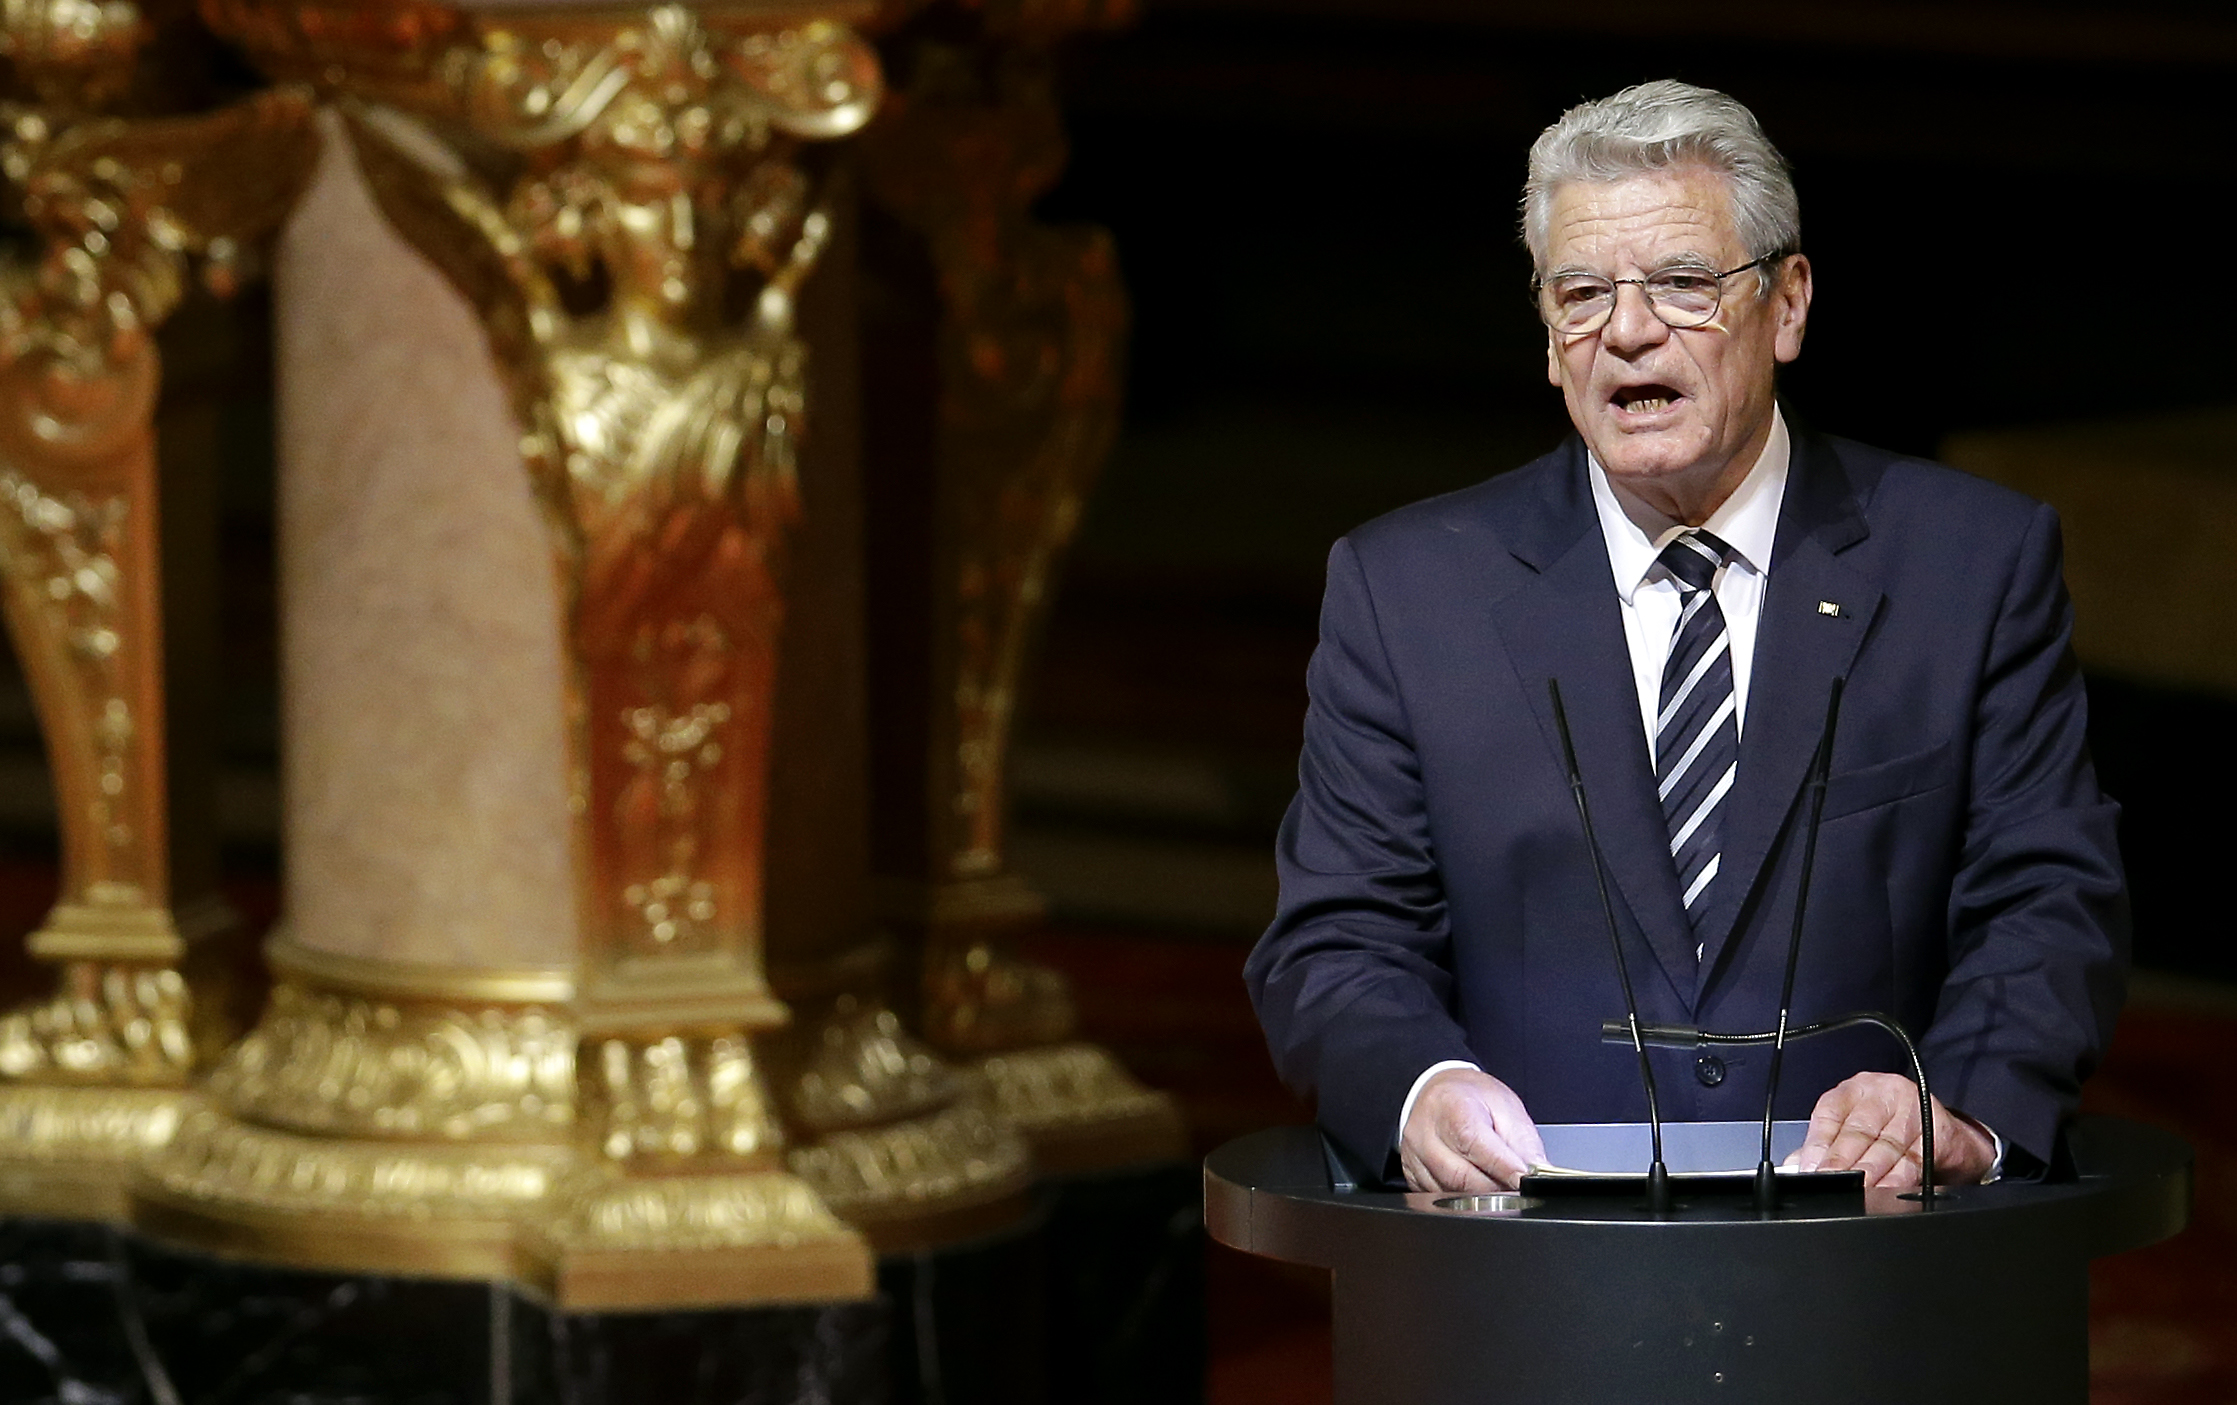 German President Joachim Gauck delivers a speech at the Berlin Cathedral Church in Berlin, Germany, April 23, 2015